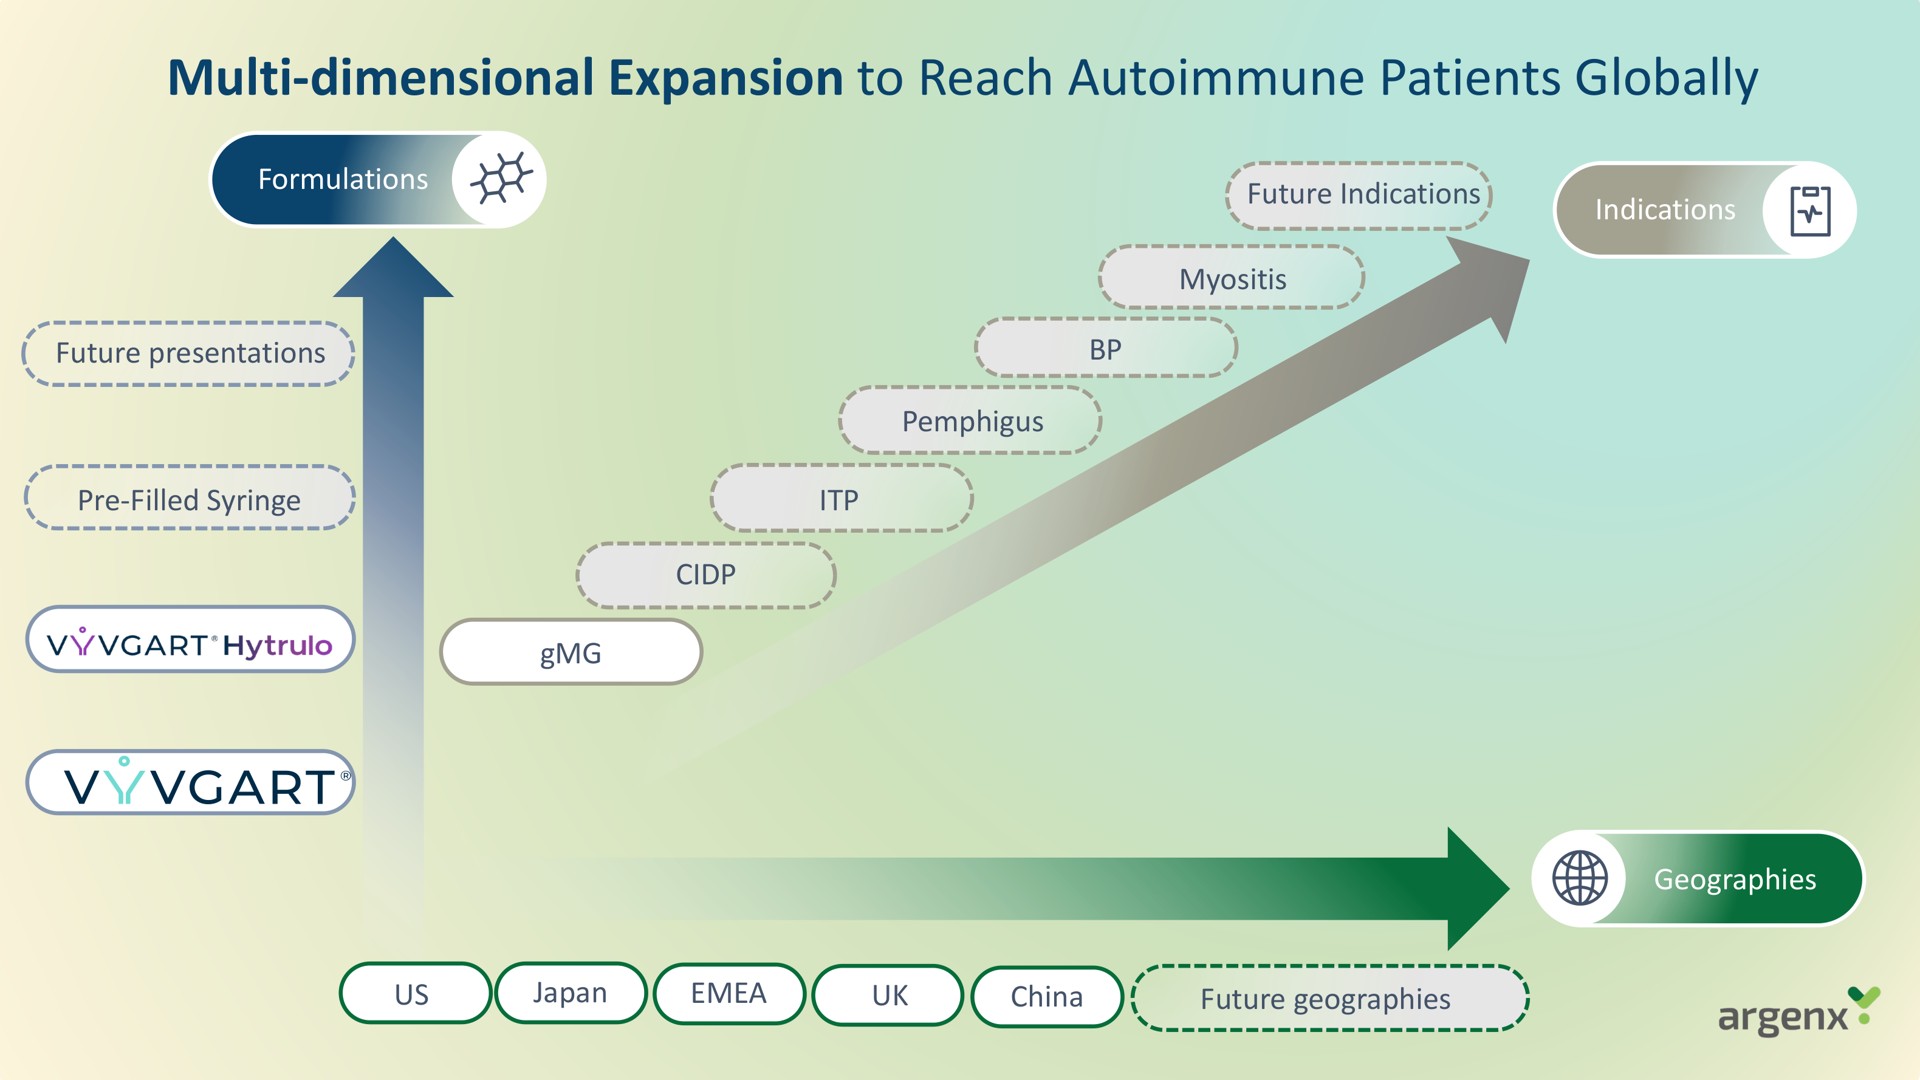 dimensional expansion to reach patients globally | argenx SE